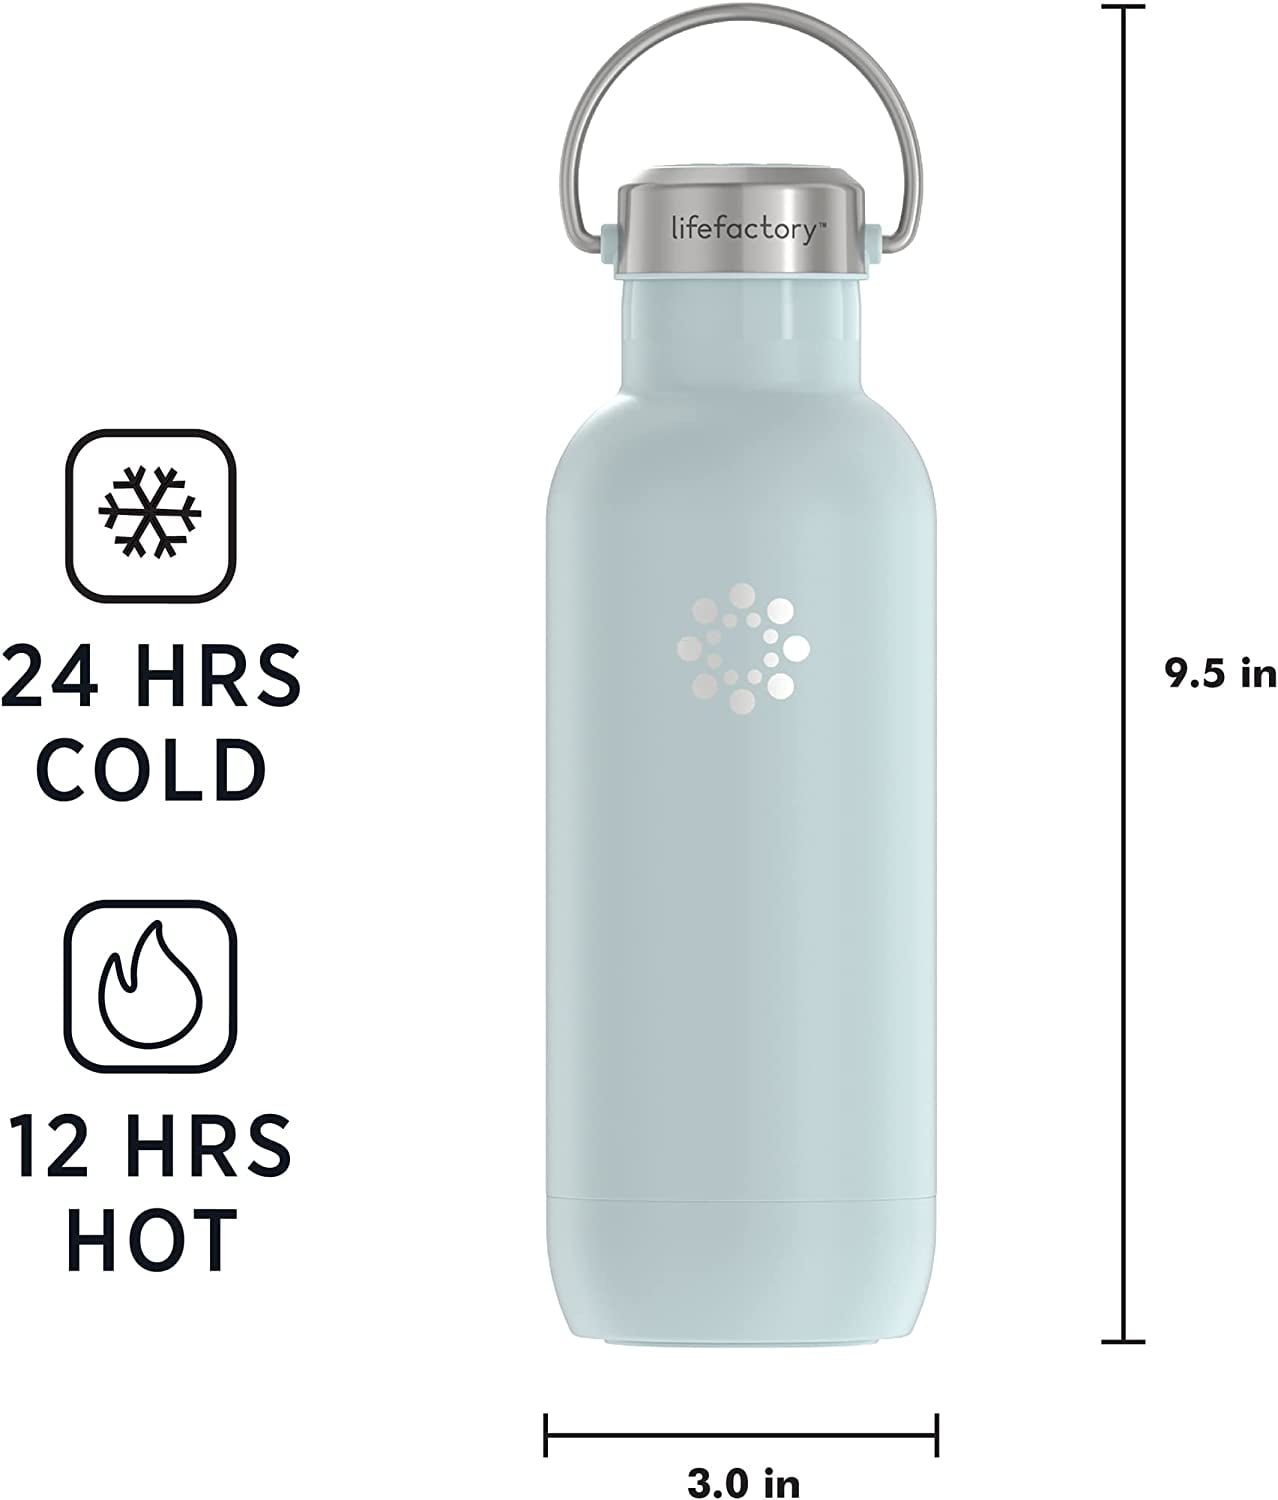 Homgreen Insulated Water Bottle with Straw, Stainless Steel Thermos Bottle  Sleeve & Carrying Strap, Travel Coffee Mug for Kids Women Men -480ml 